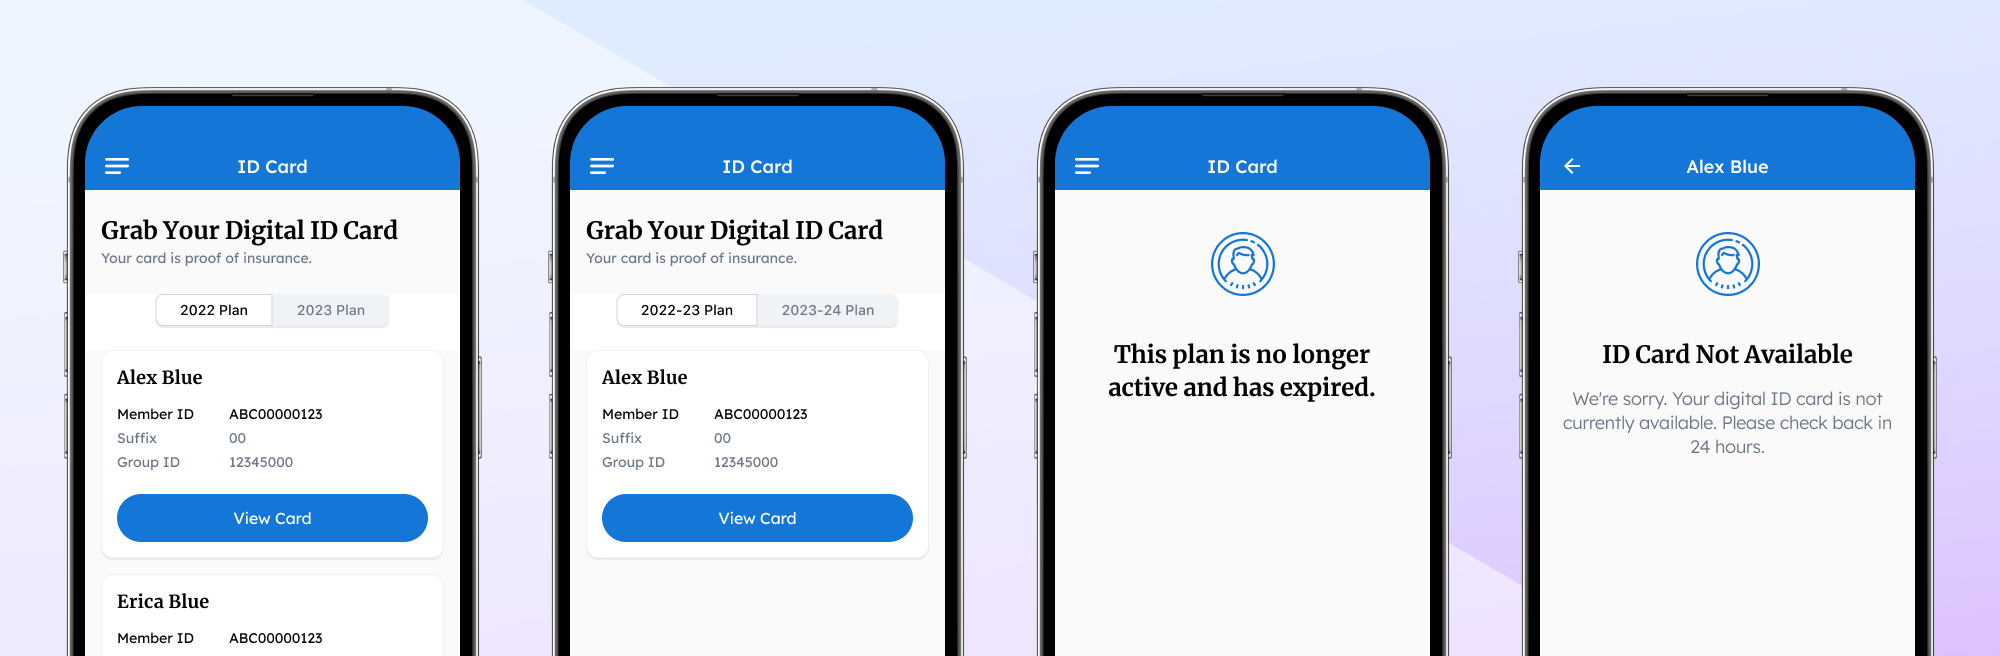 Edge case scenarios for a health insurance app. Featured design work for a digital ID card feature by Sean Berger.